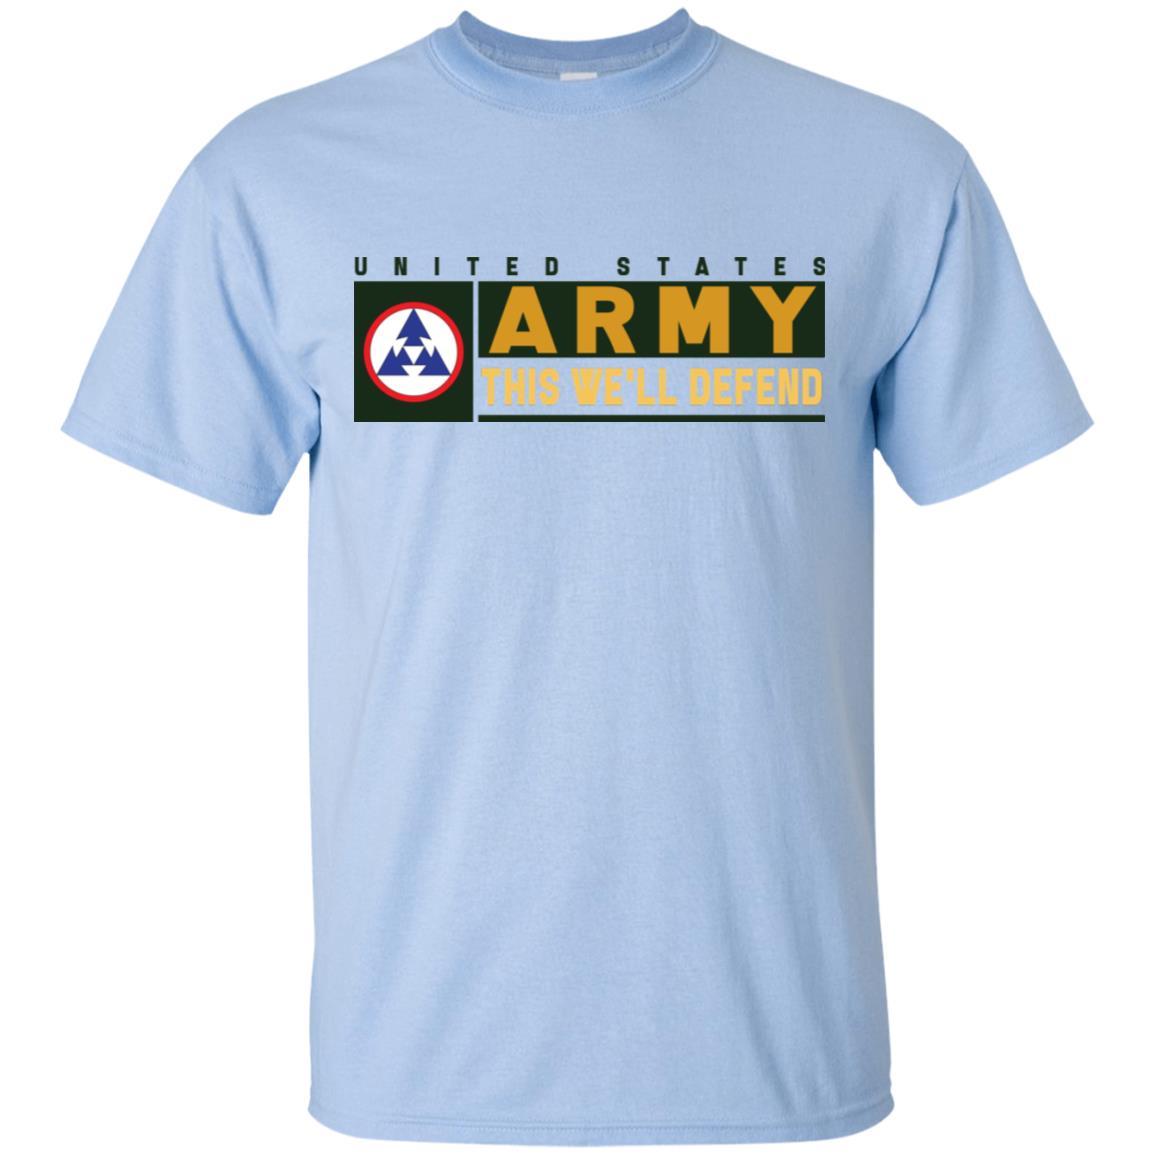 US Army 3RD SUSTAINMENT COMMAND- This We'll Defend T-Shirt On Front For Men-TShirt-Army-Veterans Nation